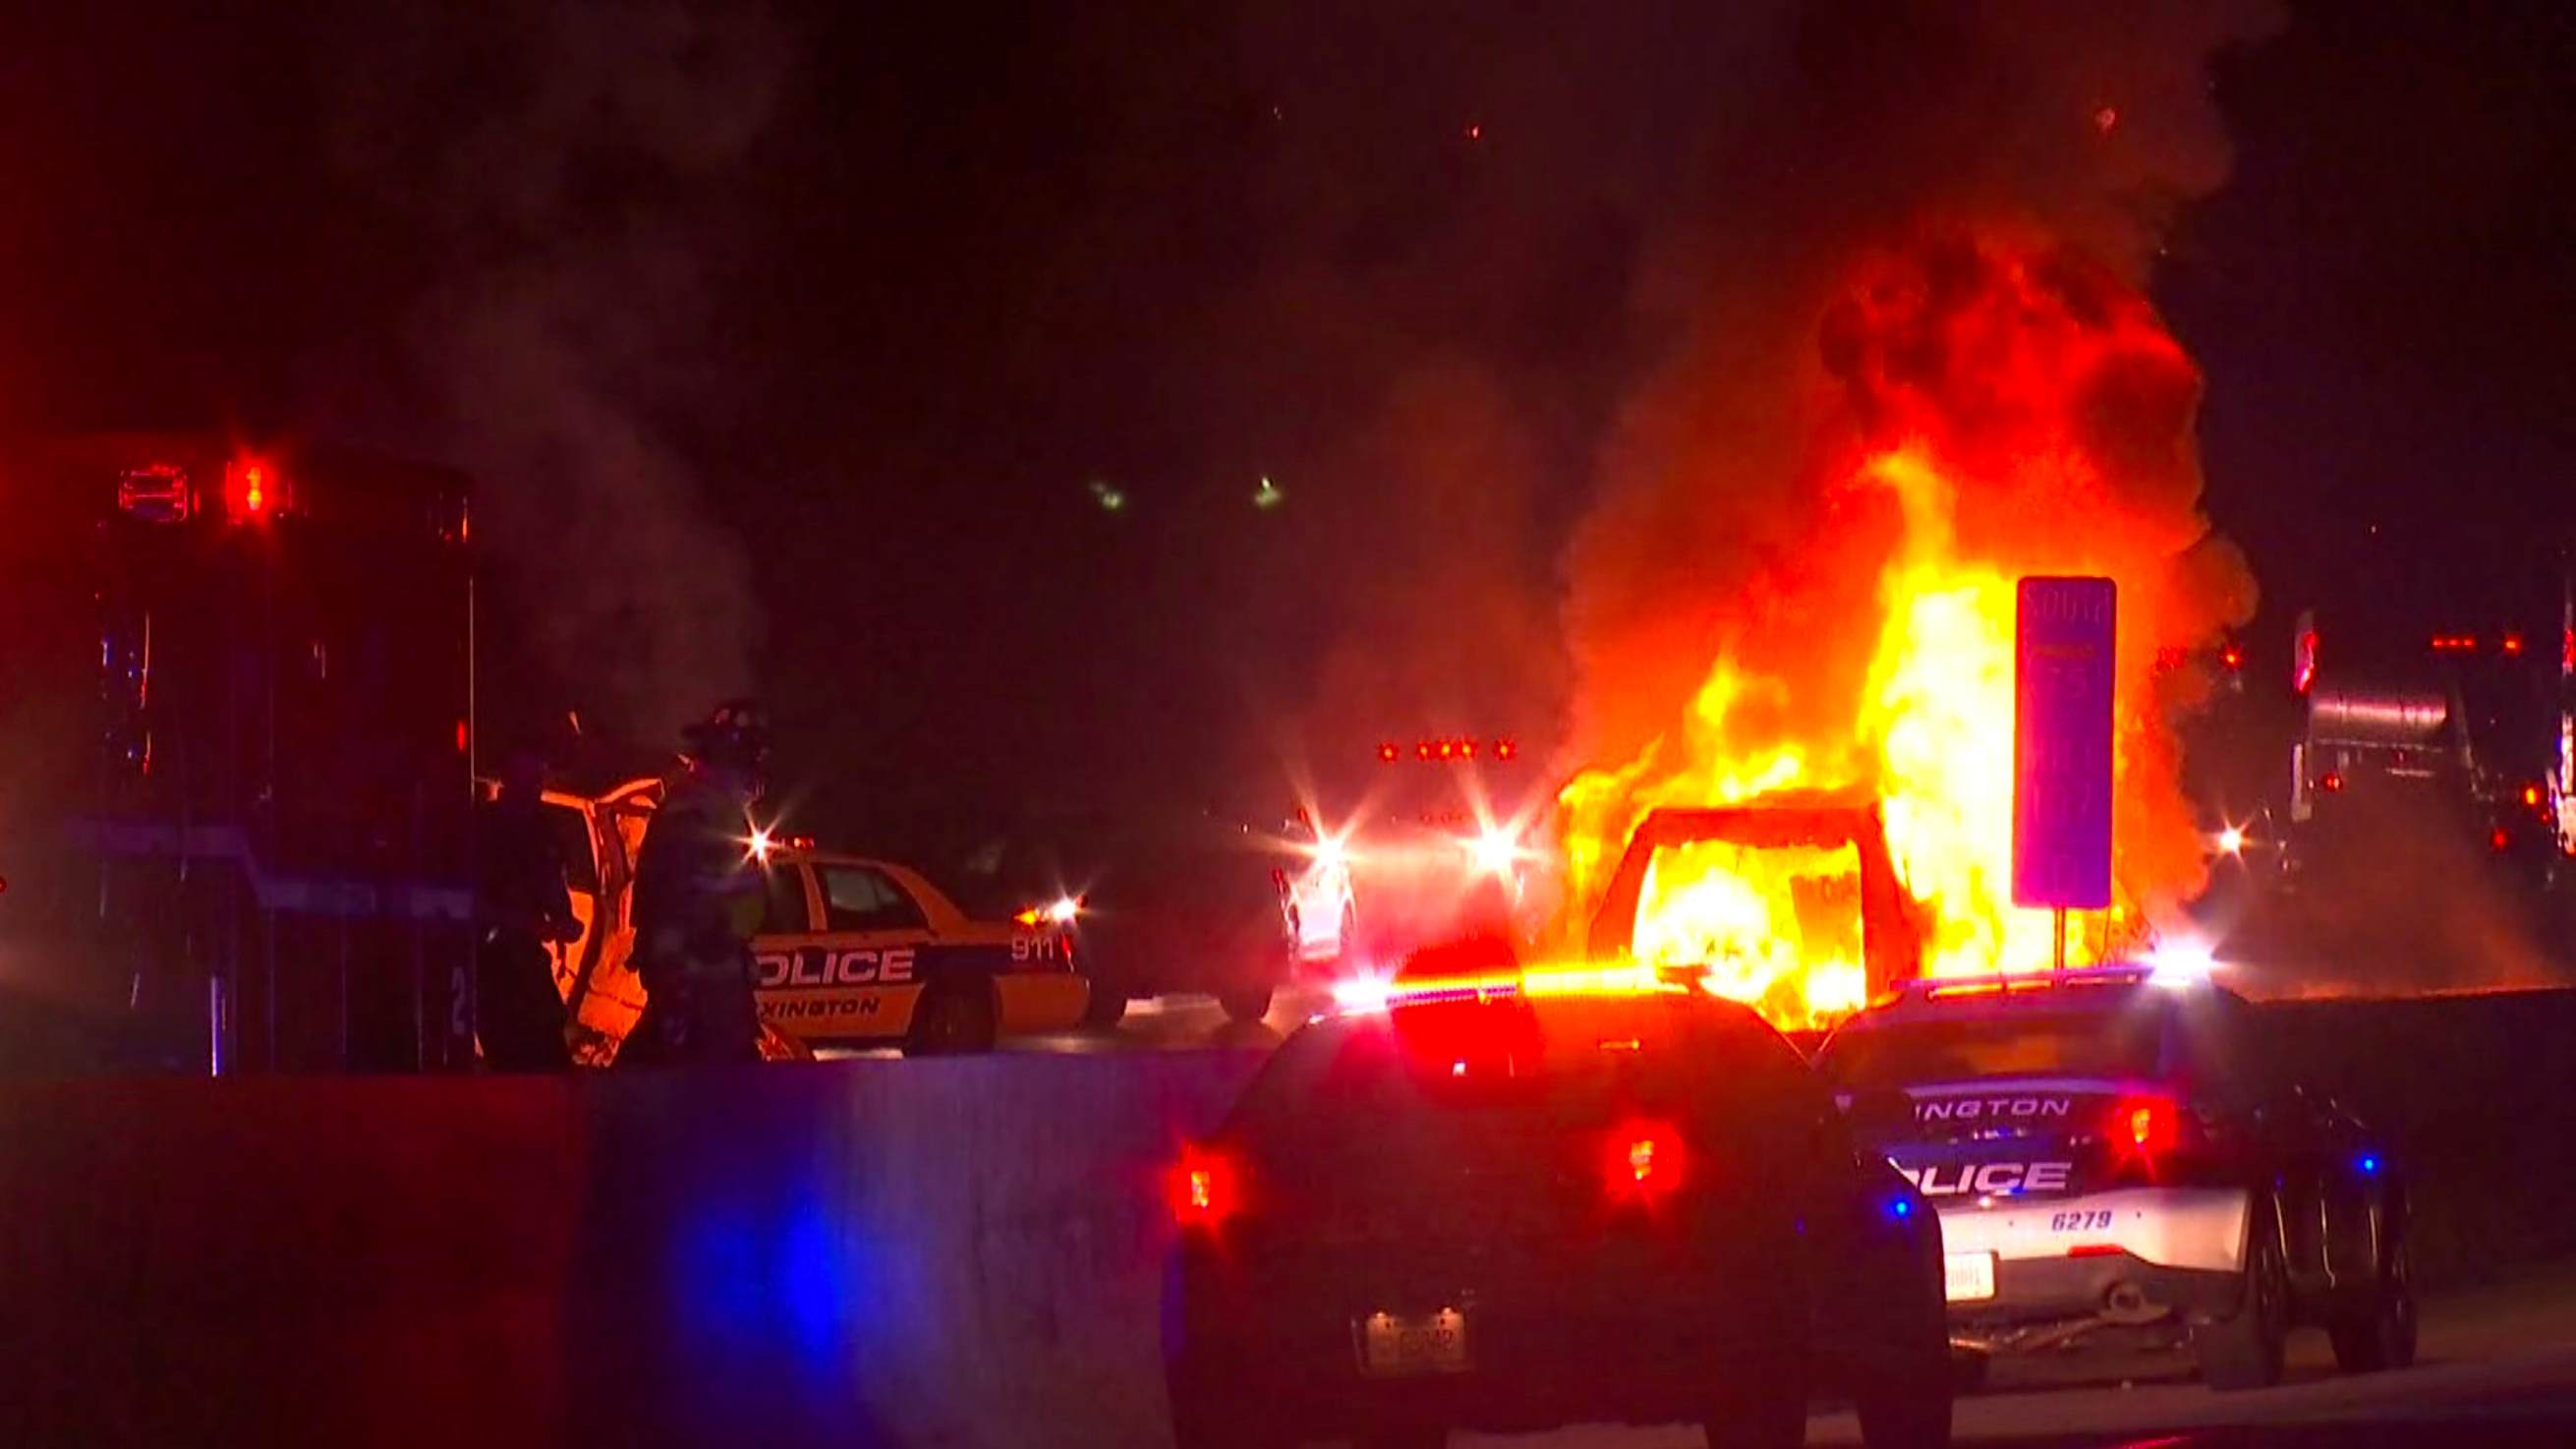 In this photo provided by LEX18, police officers and firefighters work at the scene of a deadly crash on Interstate 75 in Lexington, Ky., Sunday, Jan. 6, 2019. A suspected drunken driver heading the wrong way on a pickup truck struck a vehicle carrying several family members from Michigan early Sunday, killing all occupants of the vehicle, along with the pickup's driver, authorities said. [Photo: LEX18 via AP]